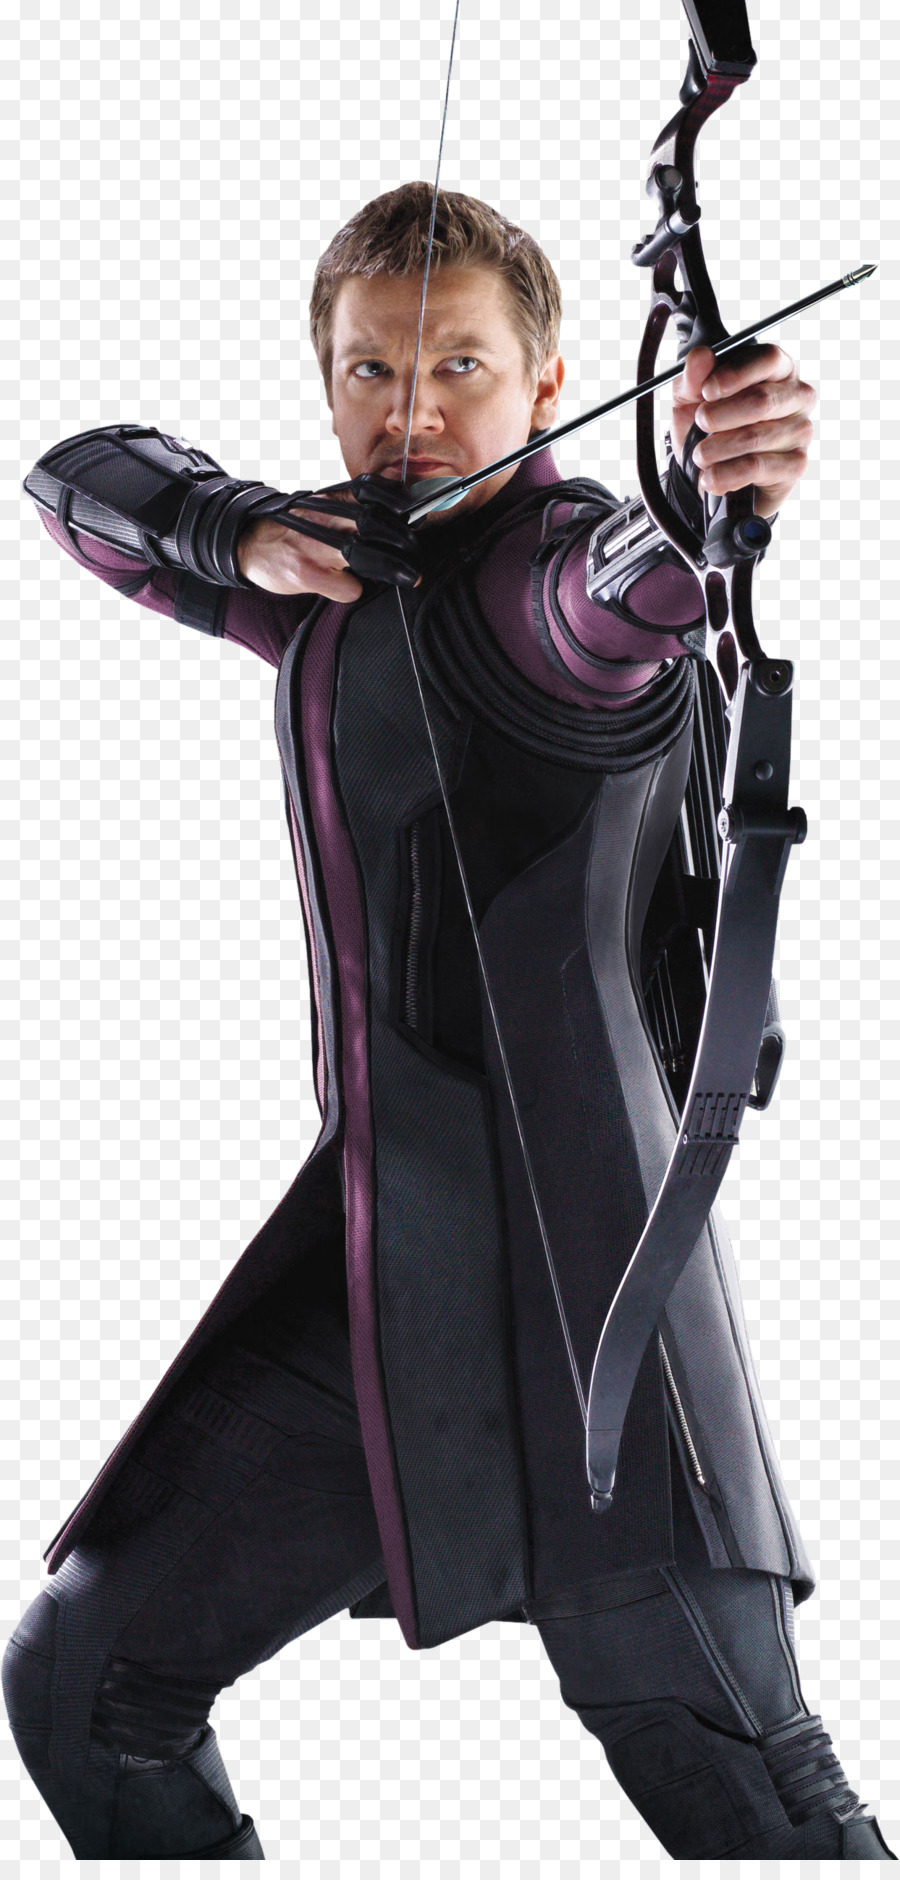 Jeremy Renner Clint Barton Black Widow Iron Man Avengers: Age of Ultron - Download Hawkeye Icon png download - 1243*2569 - Free Transparent  png Download.